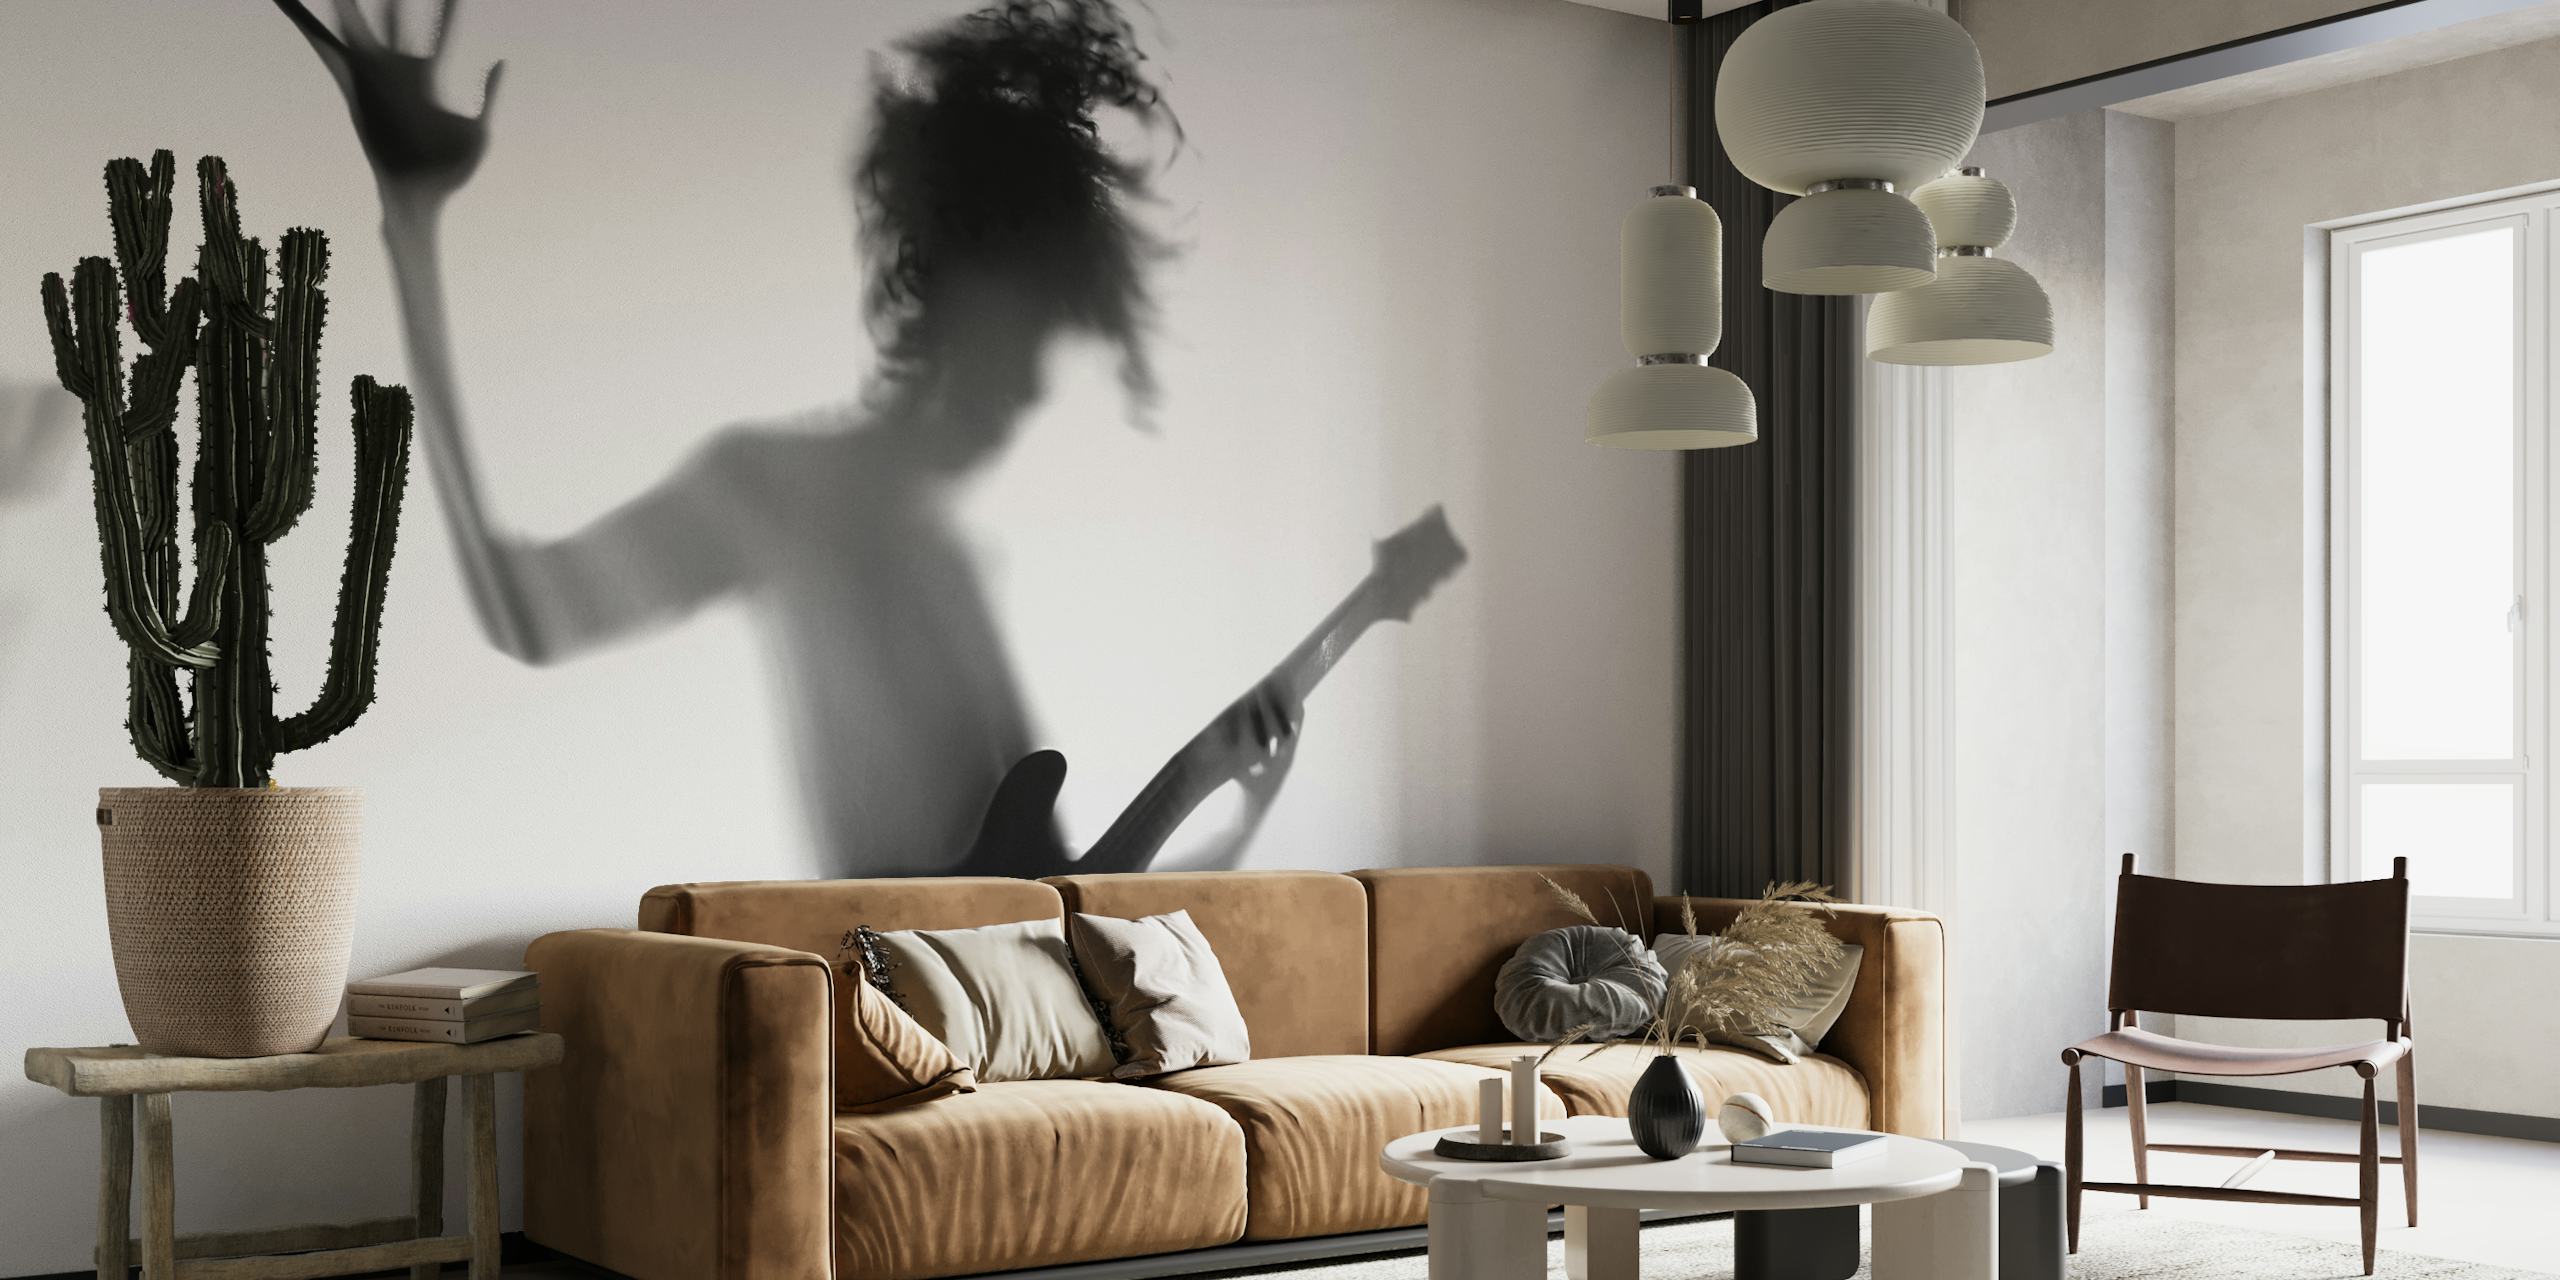 Silhouette of a person playing guitar in a dynamic pose in black and white.